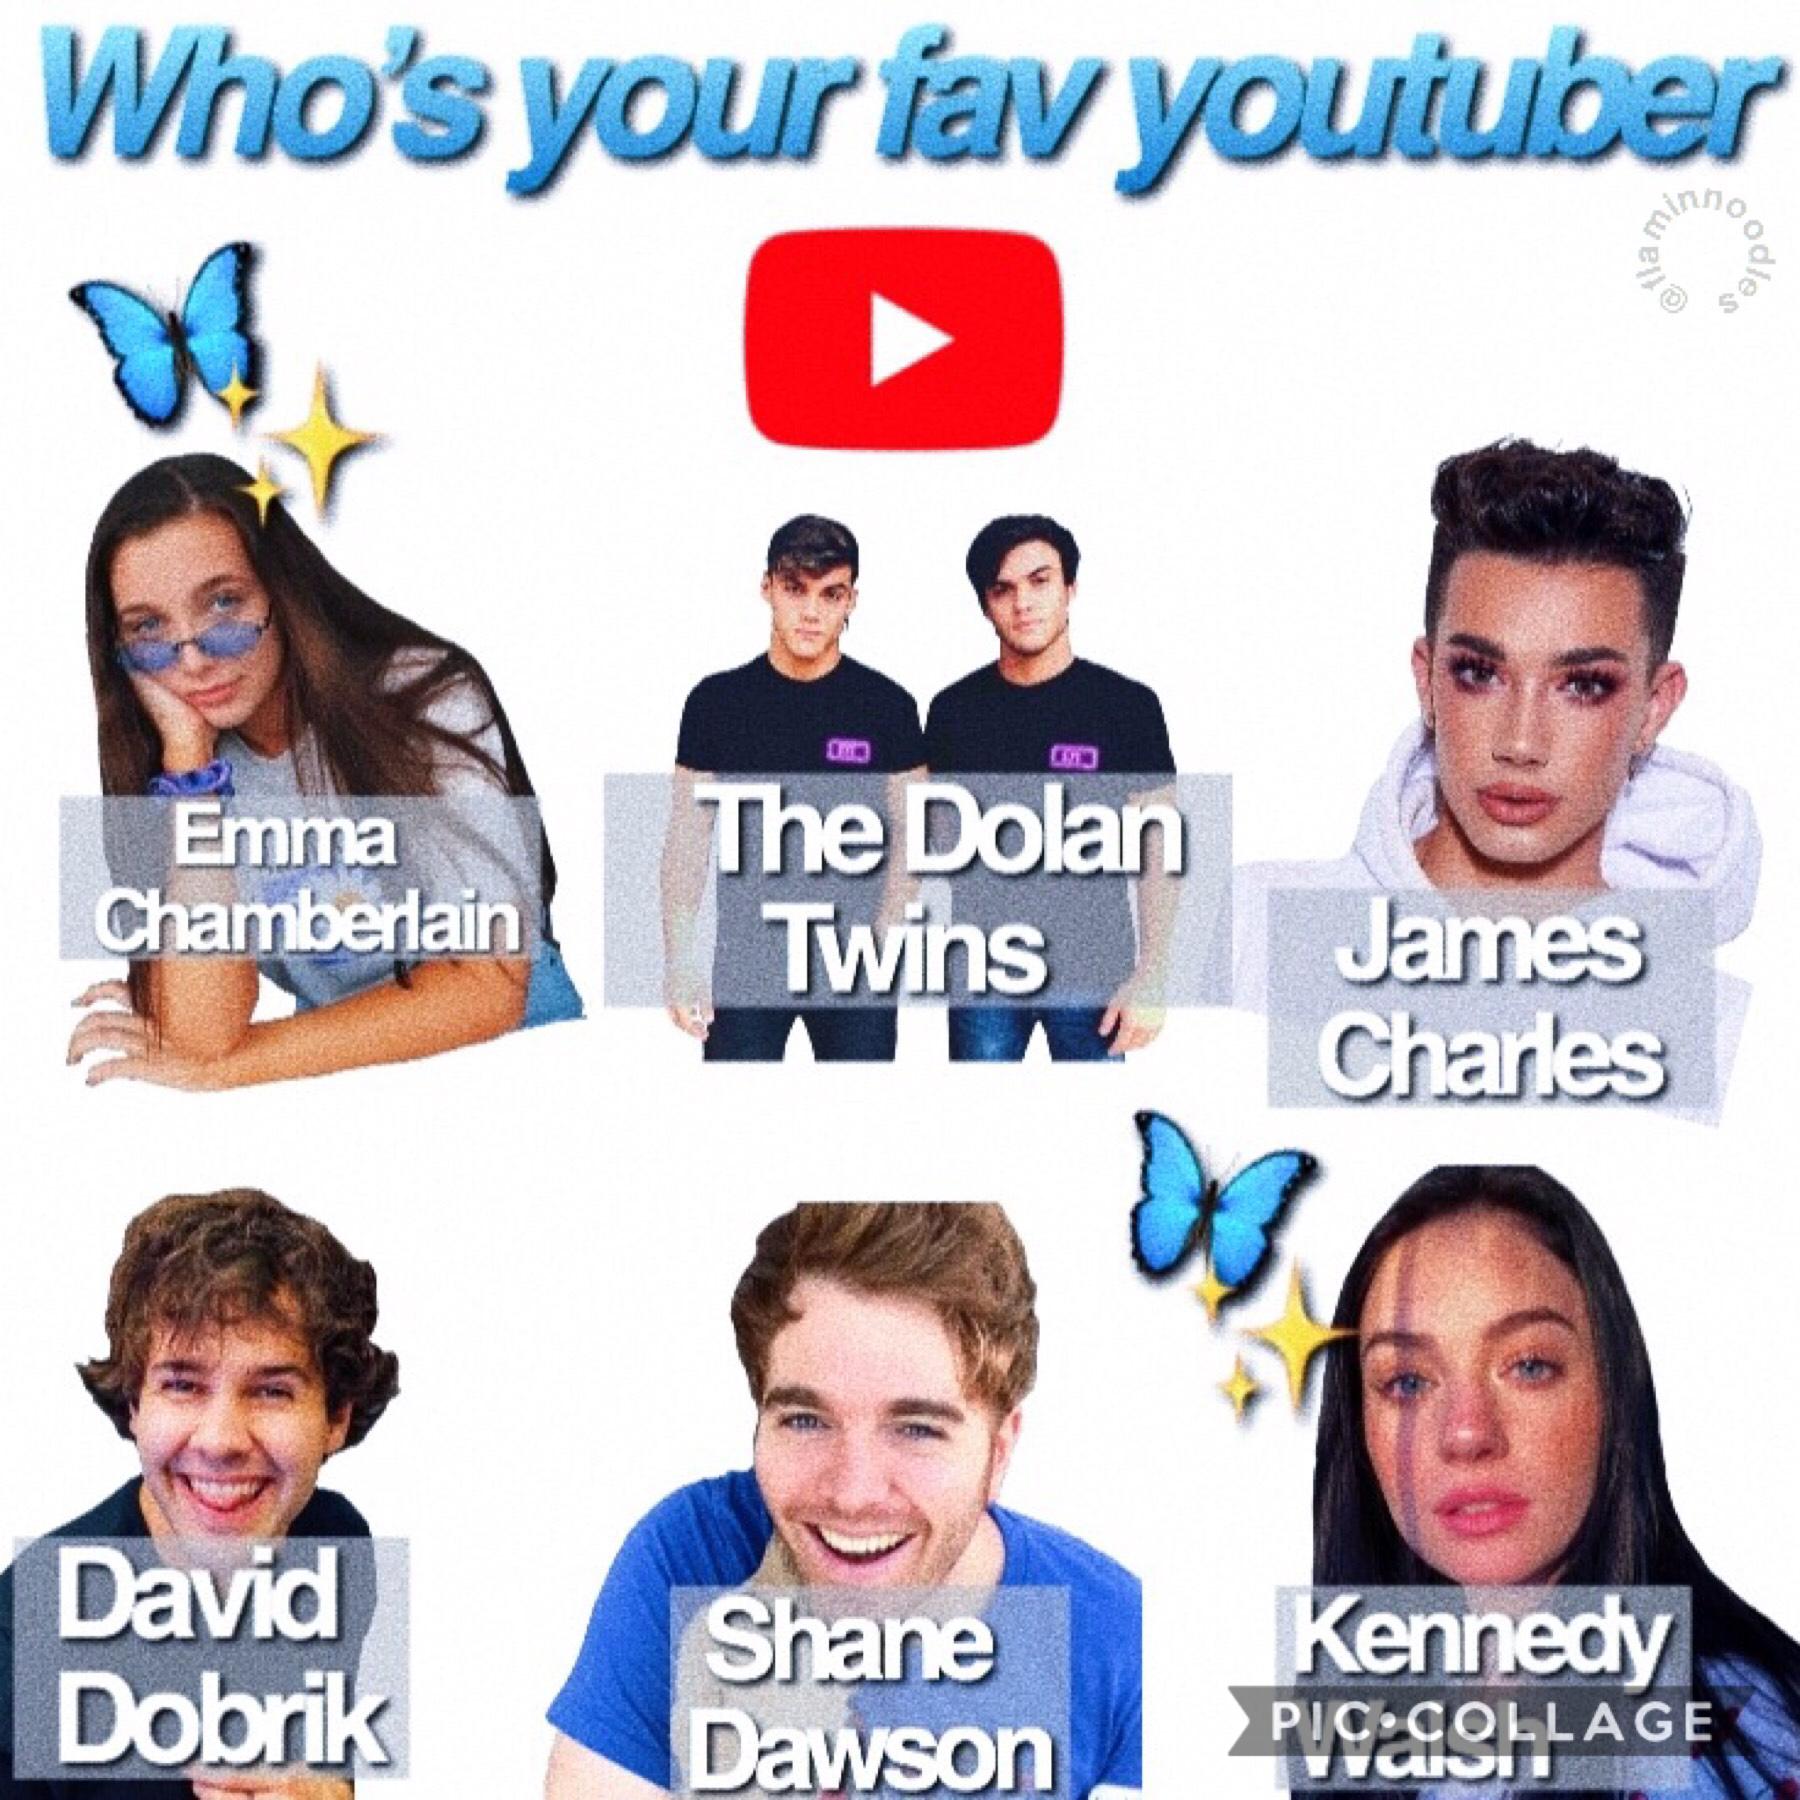  💙 T A P 💙
(btw it says Kennedy Walsh the stupid logo was in the way and im not paying money to get it removed 😆)
Who’s your favorite YouTuber?
(and if they aren’t on here just comment them)

